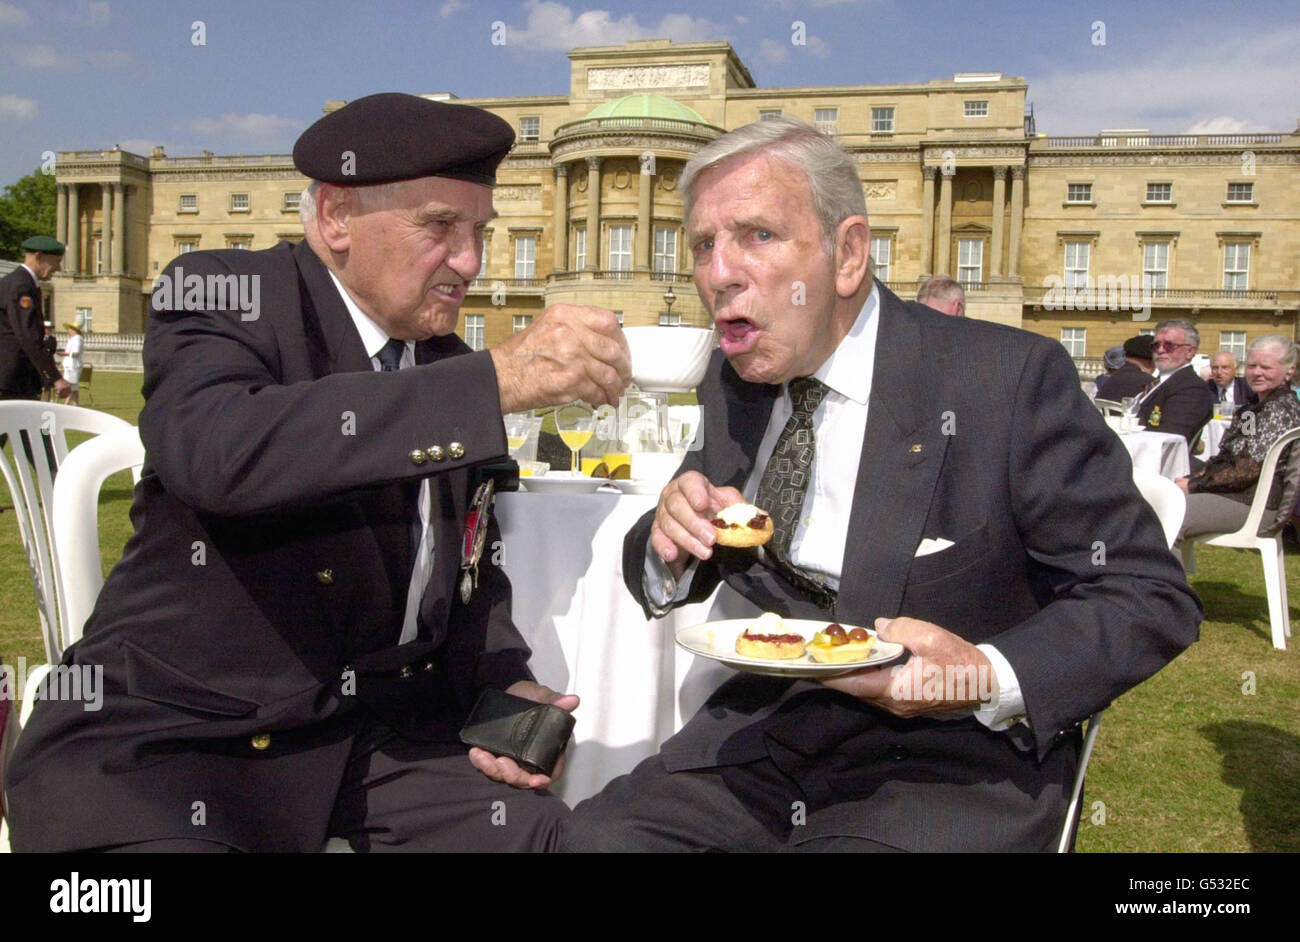 Normandy veteran and former gunner Bill Collins, 81, of Cork, shares afternoon tea with Sir Norman Wisdom during the 'Not Forgotten Garden Party', attended by the Princess Royal in the grounds of Buckingham Palace. Stock Photo